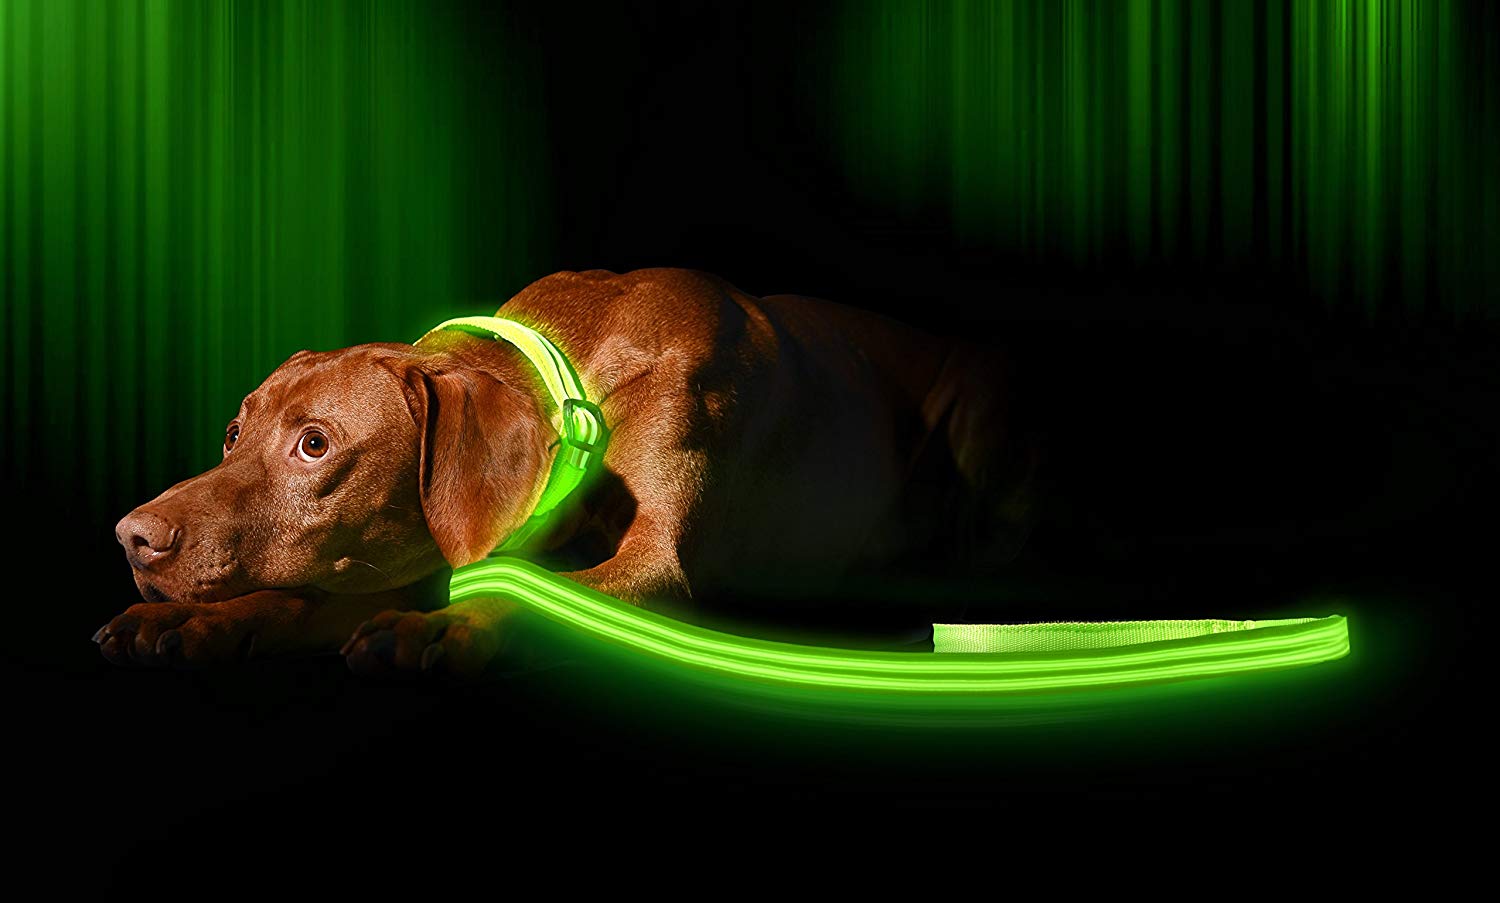 Illumiseen LED Dog Leash - USB Rechargeable - Available in 6 Colors & 2 Sizes - Makes Your Dog Visible, Safe & Seen 2